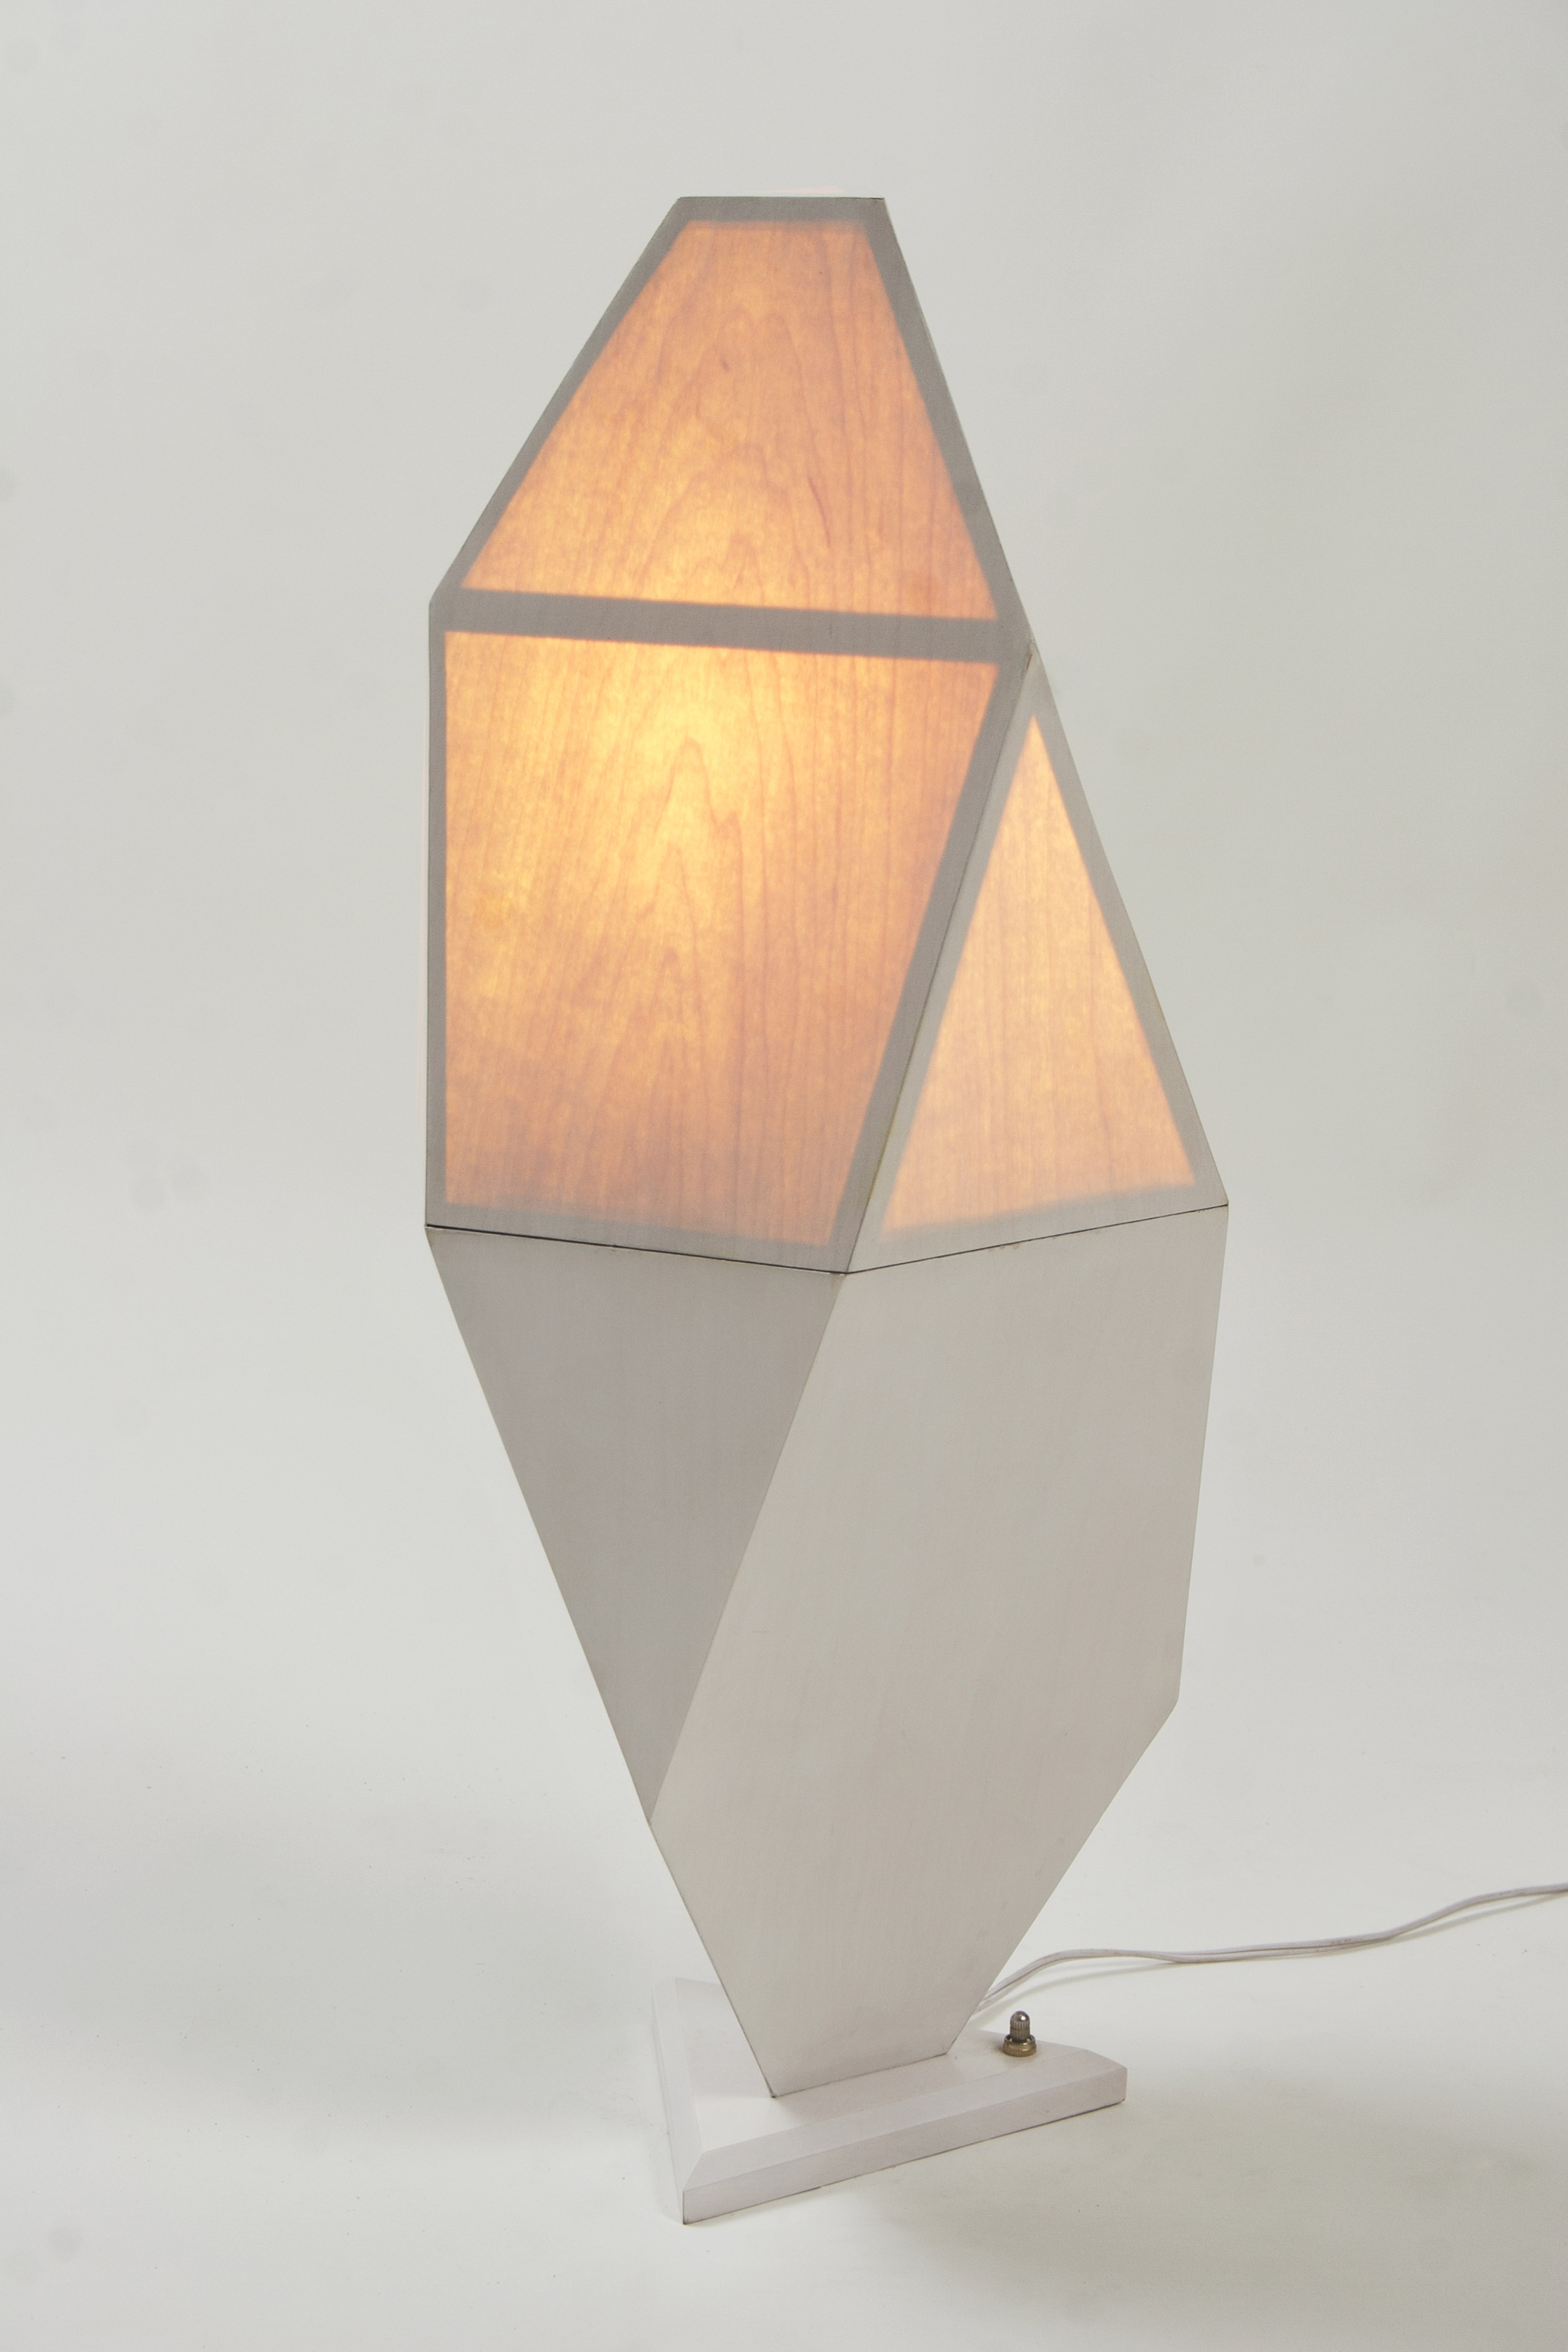 This photo shows a lamp made of geometric shapes covered with wood veneer, with the top half lit